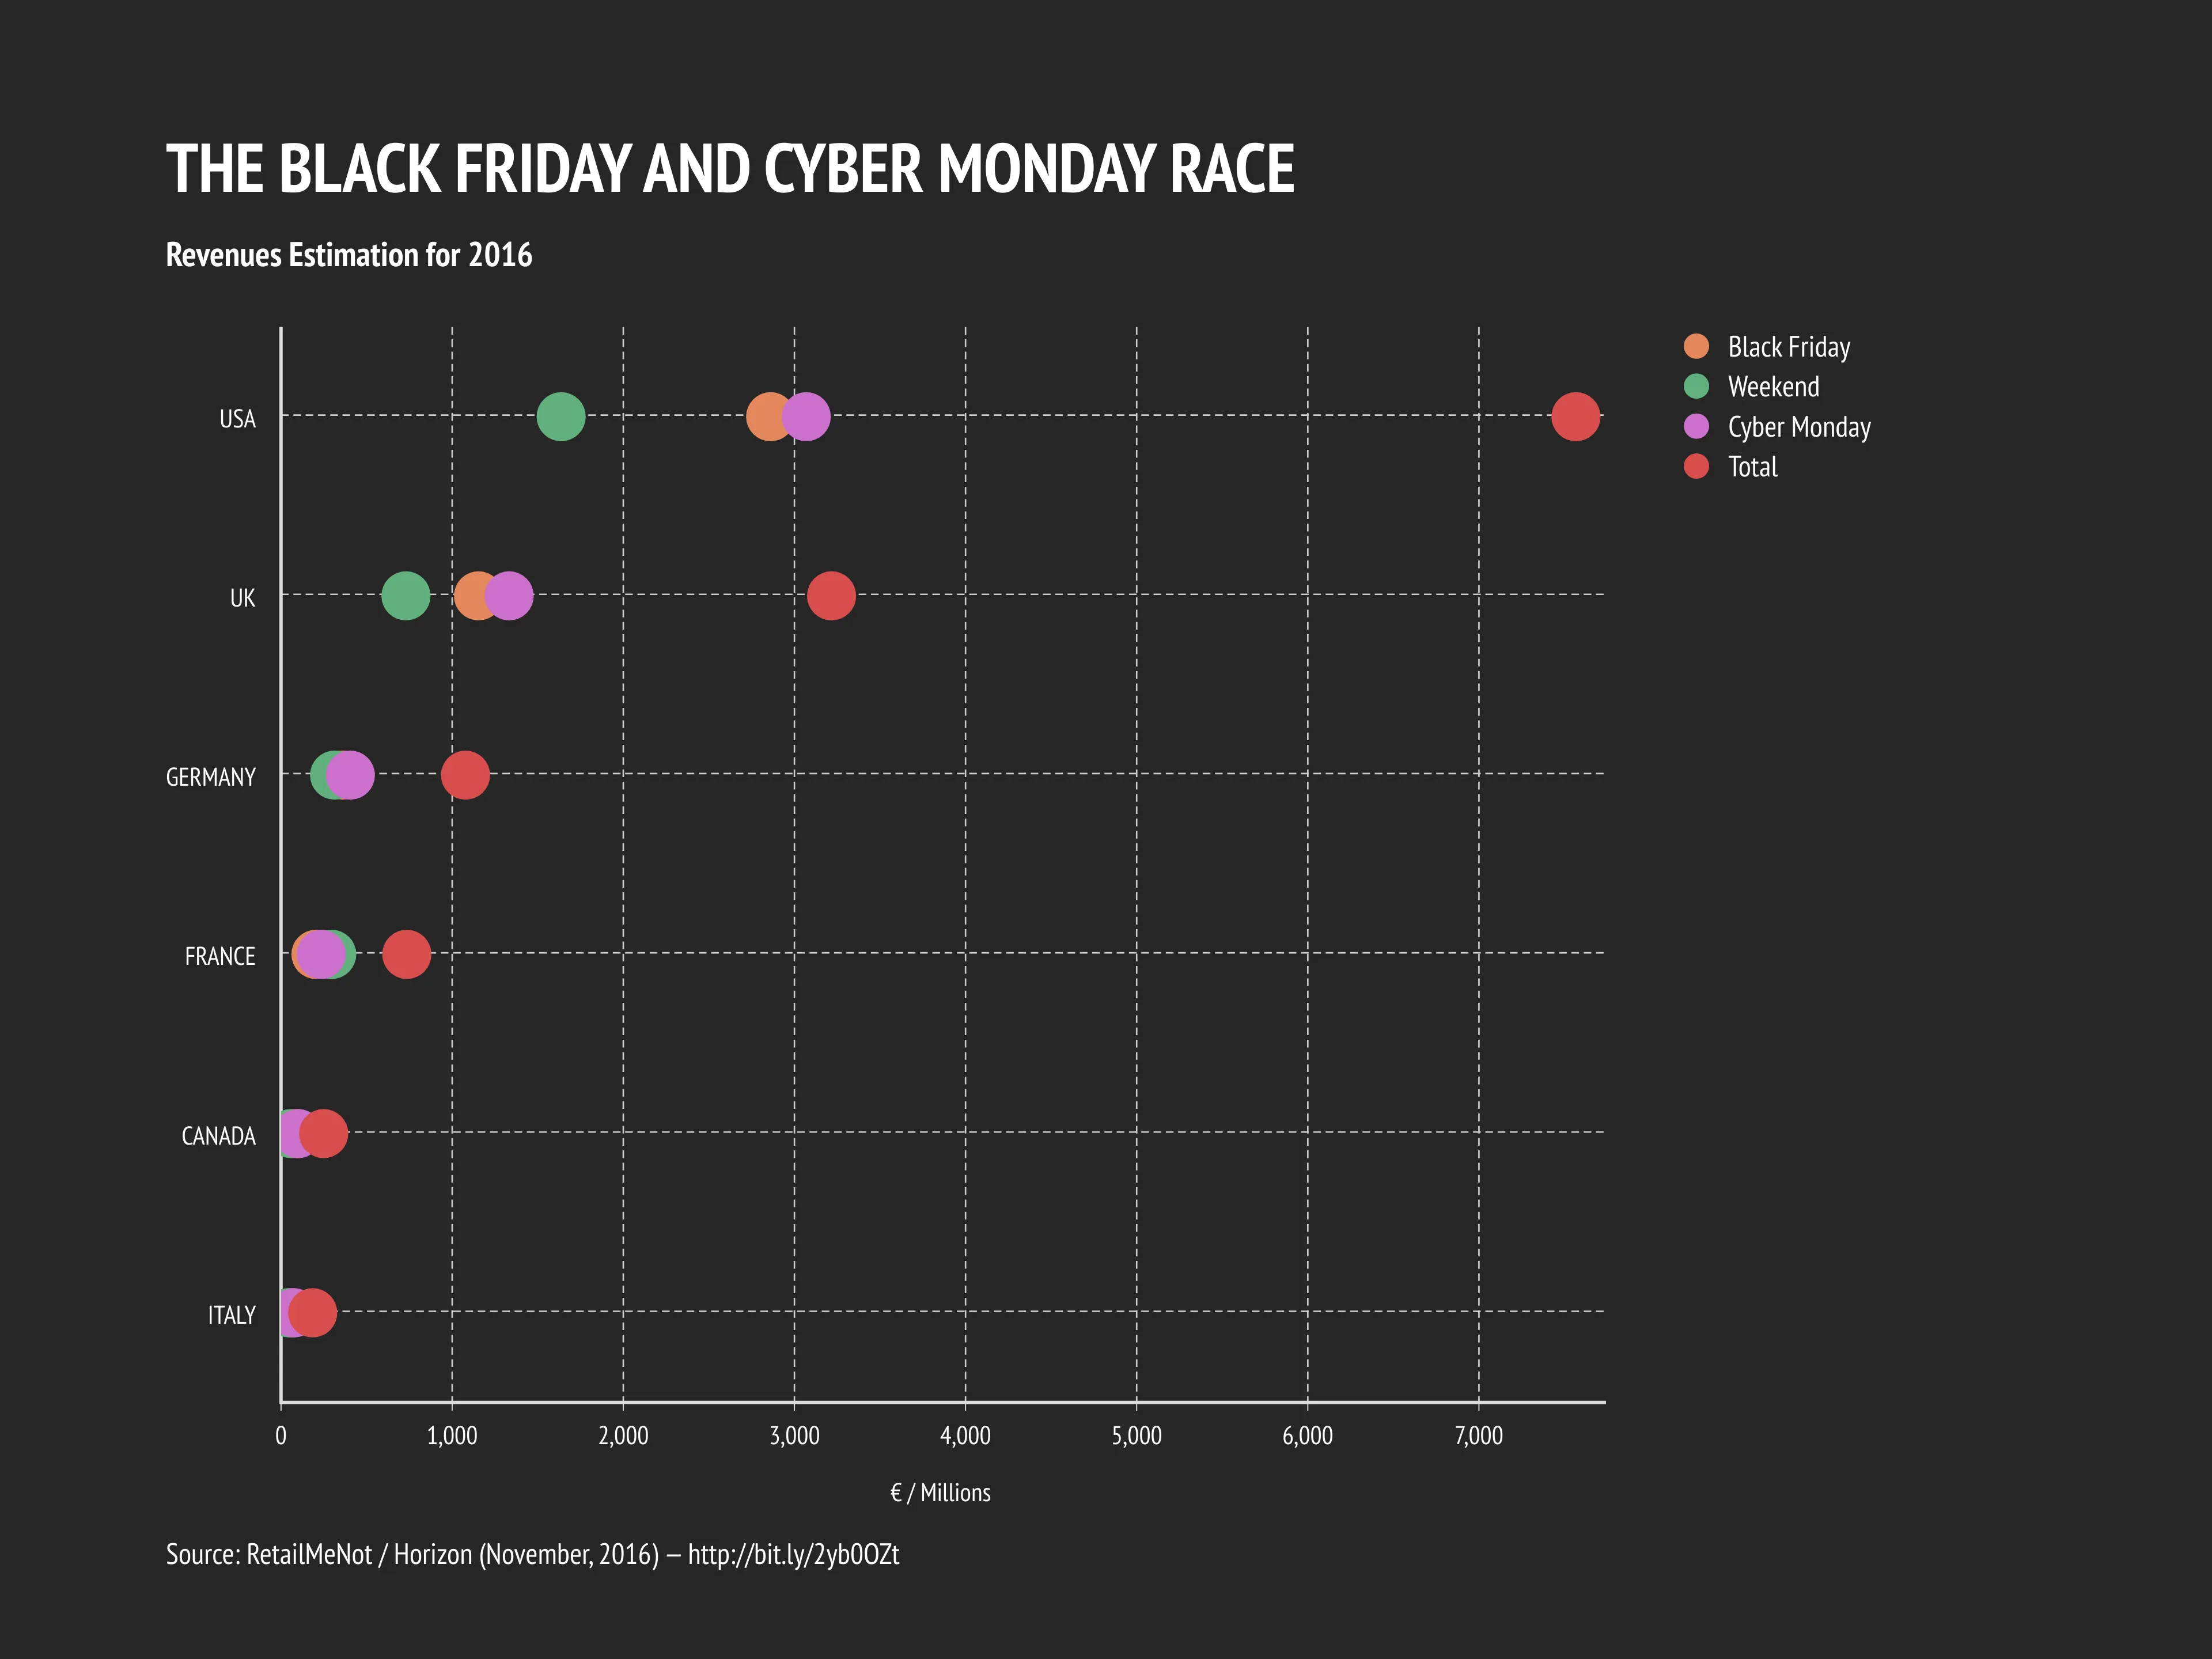 THE BLACK FRIDAY AND CYBER MONDAY RACE